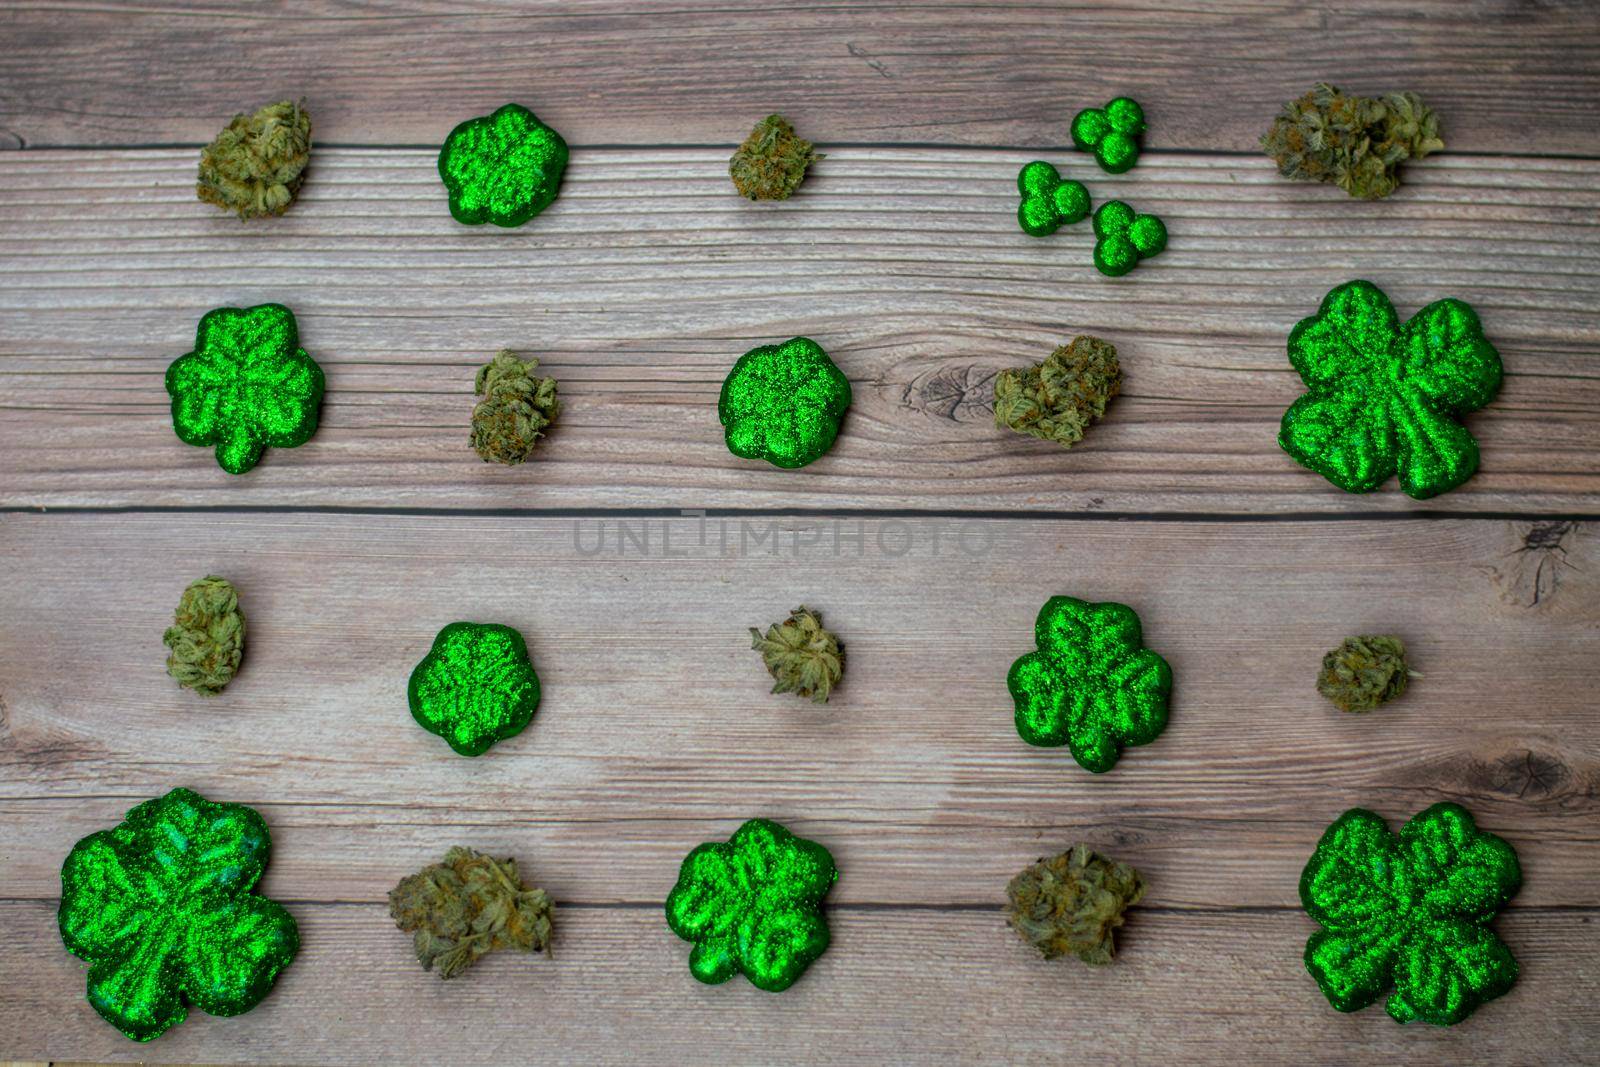 Cannabis Nugs and Glitter Covered Four Leaf Clovers on a Wood Background by bju12290